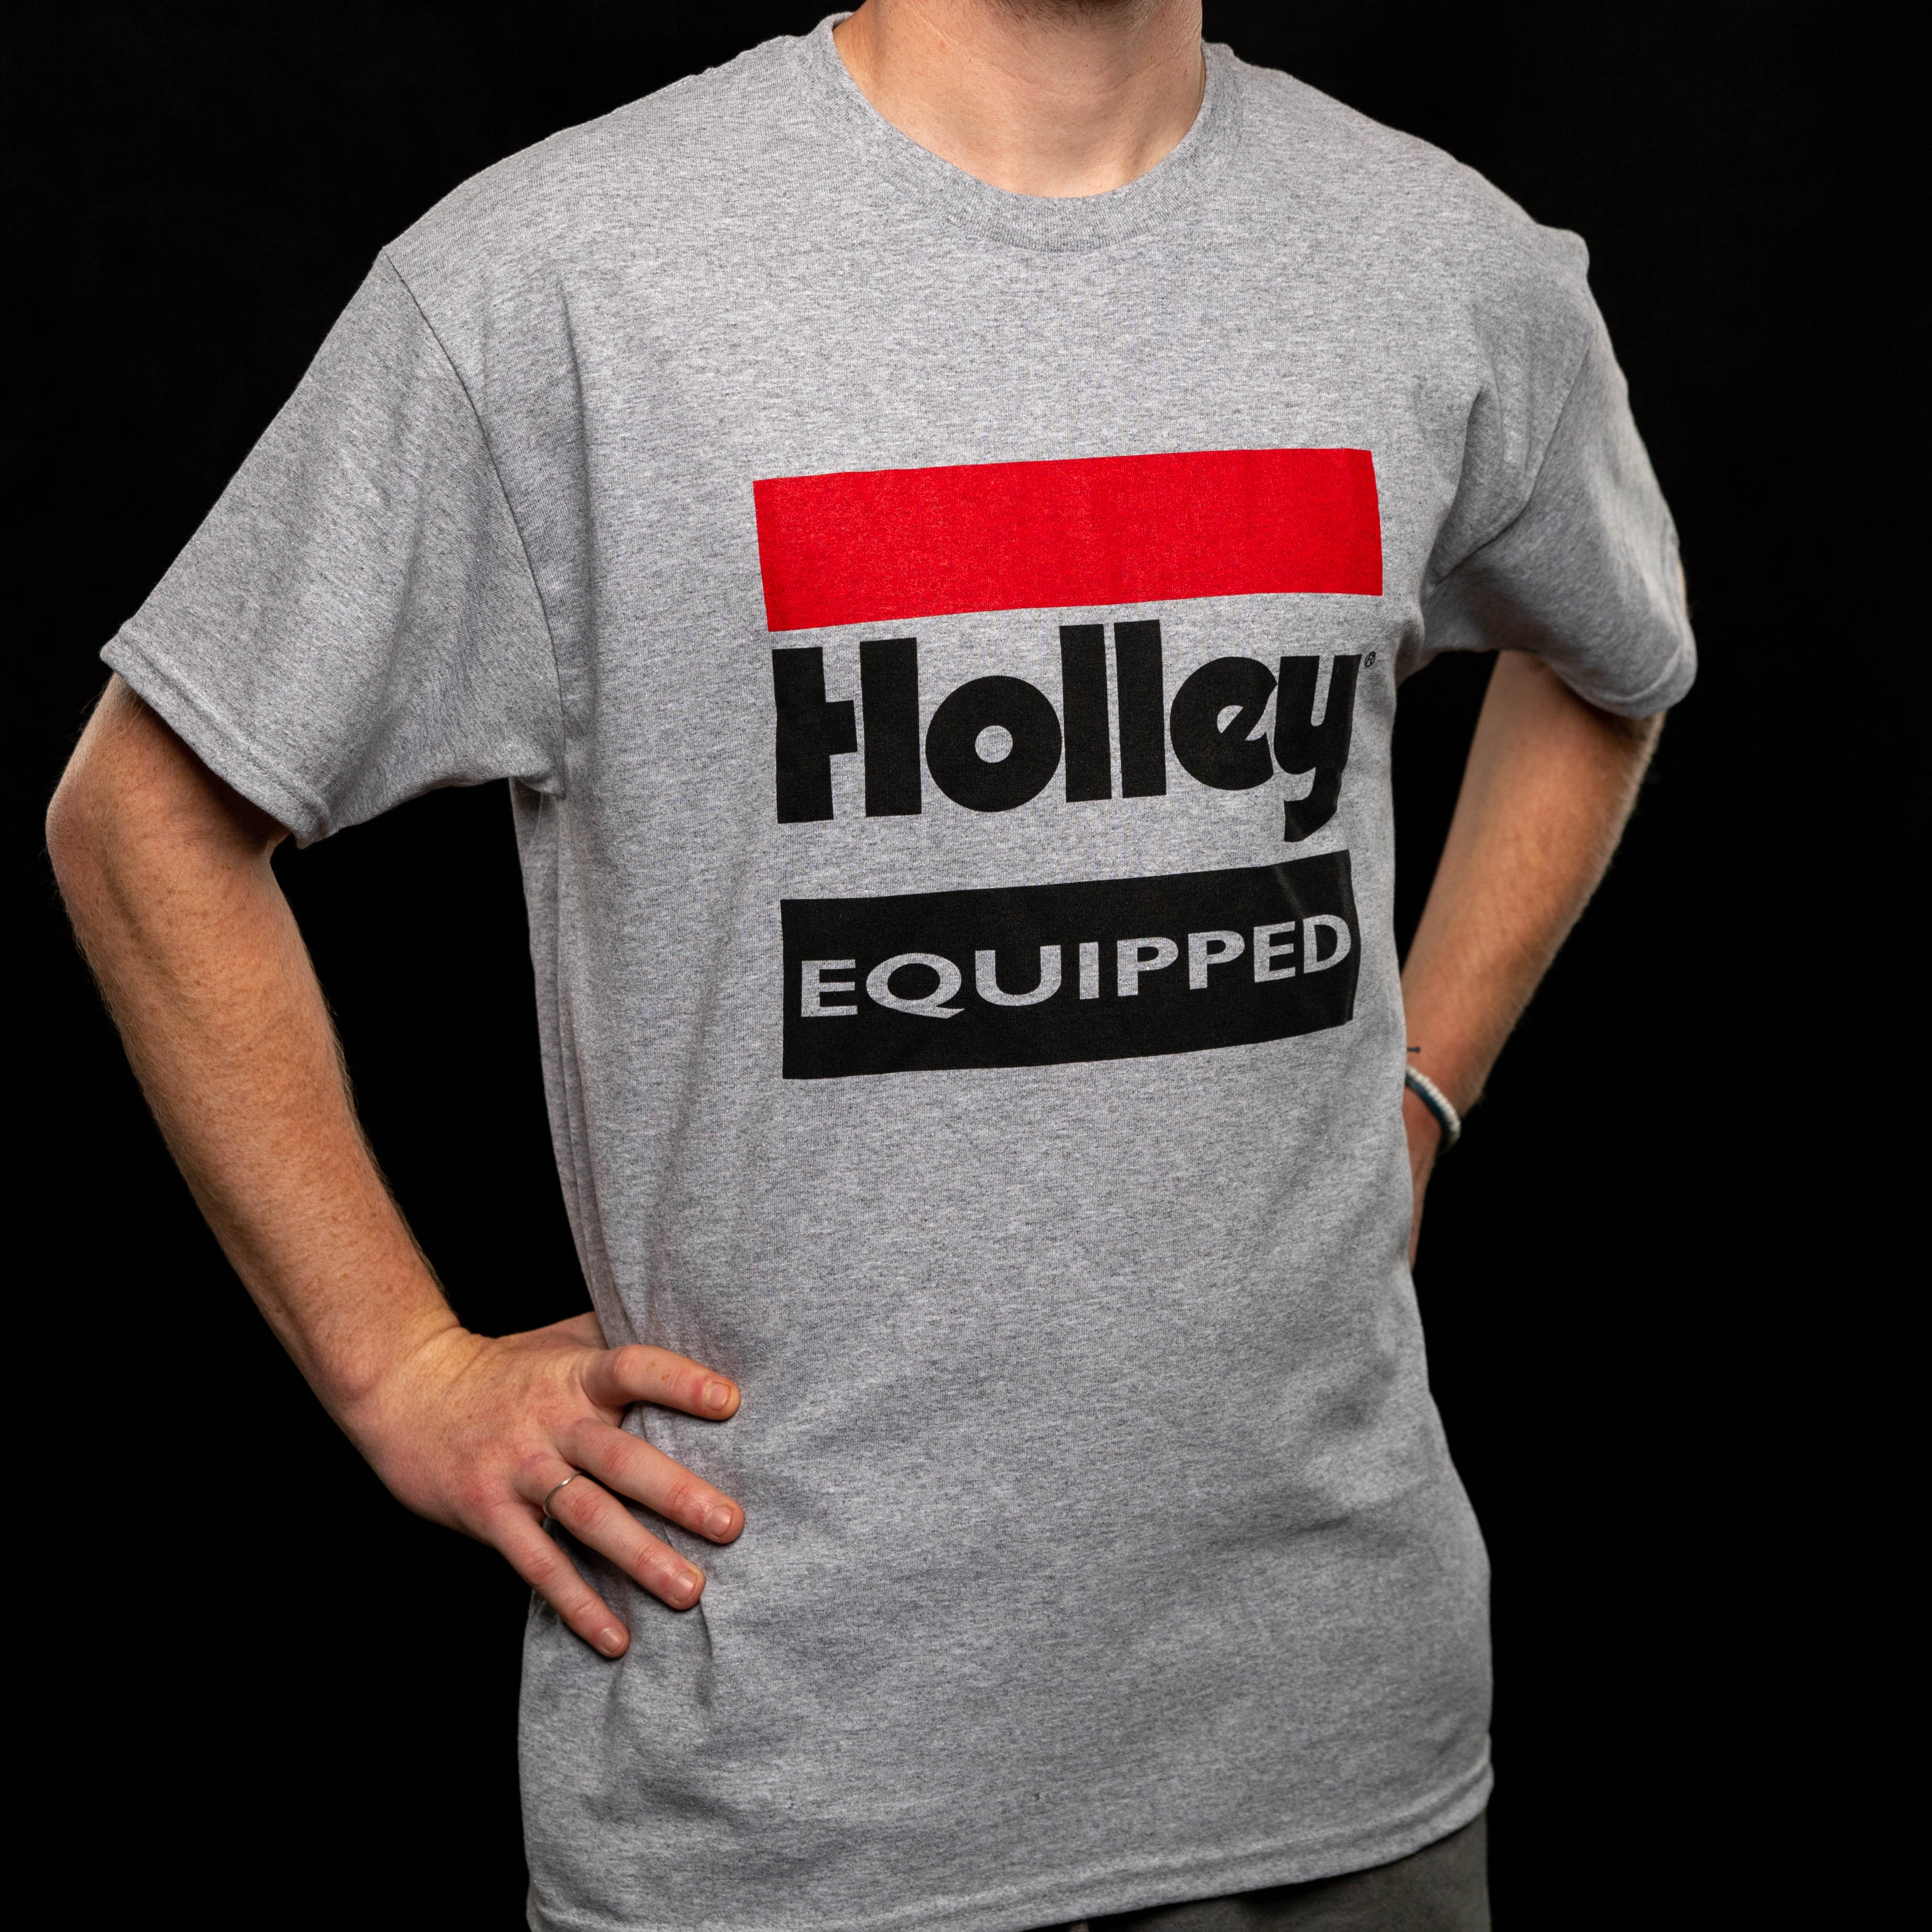 Holley Equipped T-shirt - Grey